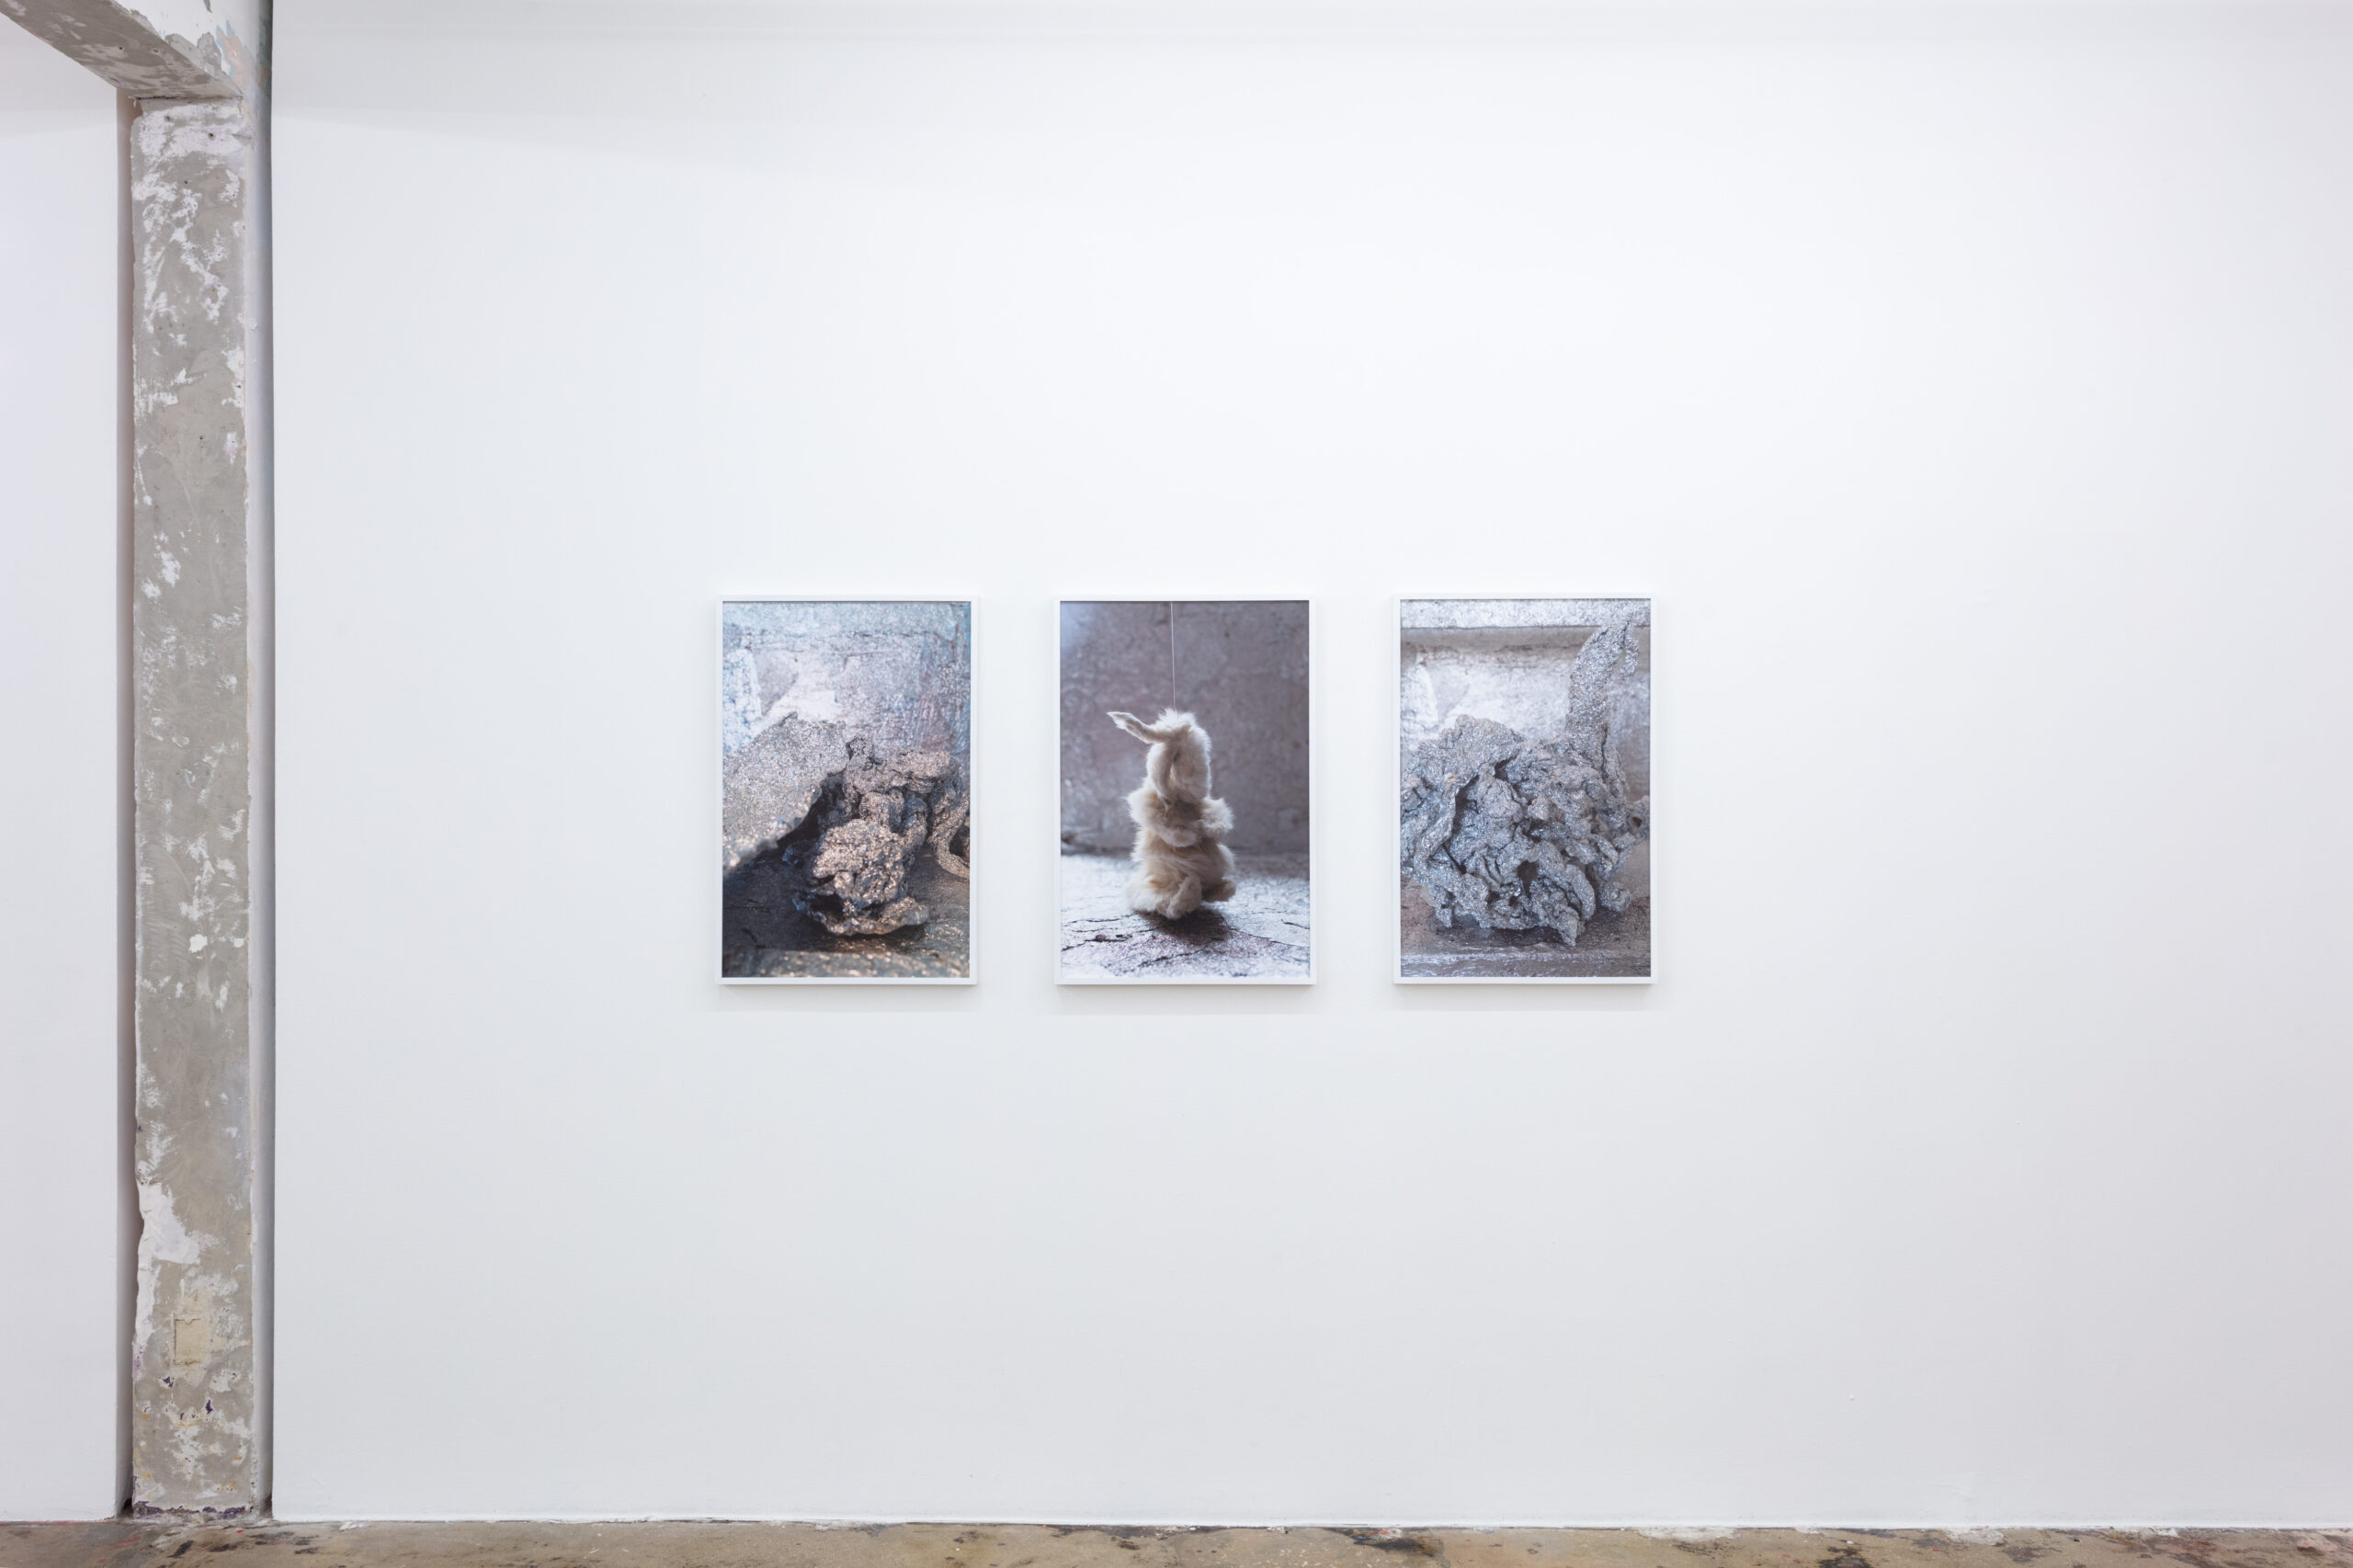 Anna Betbeze, Forms Like Dreams, installation view